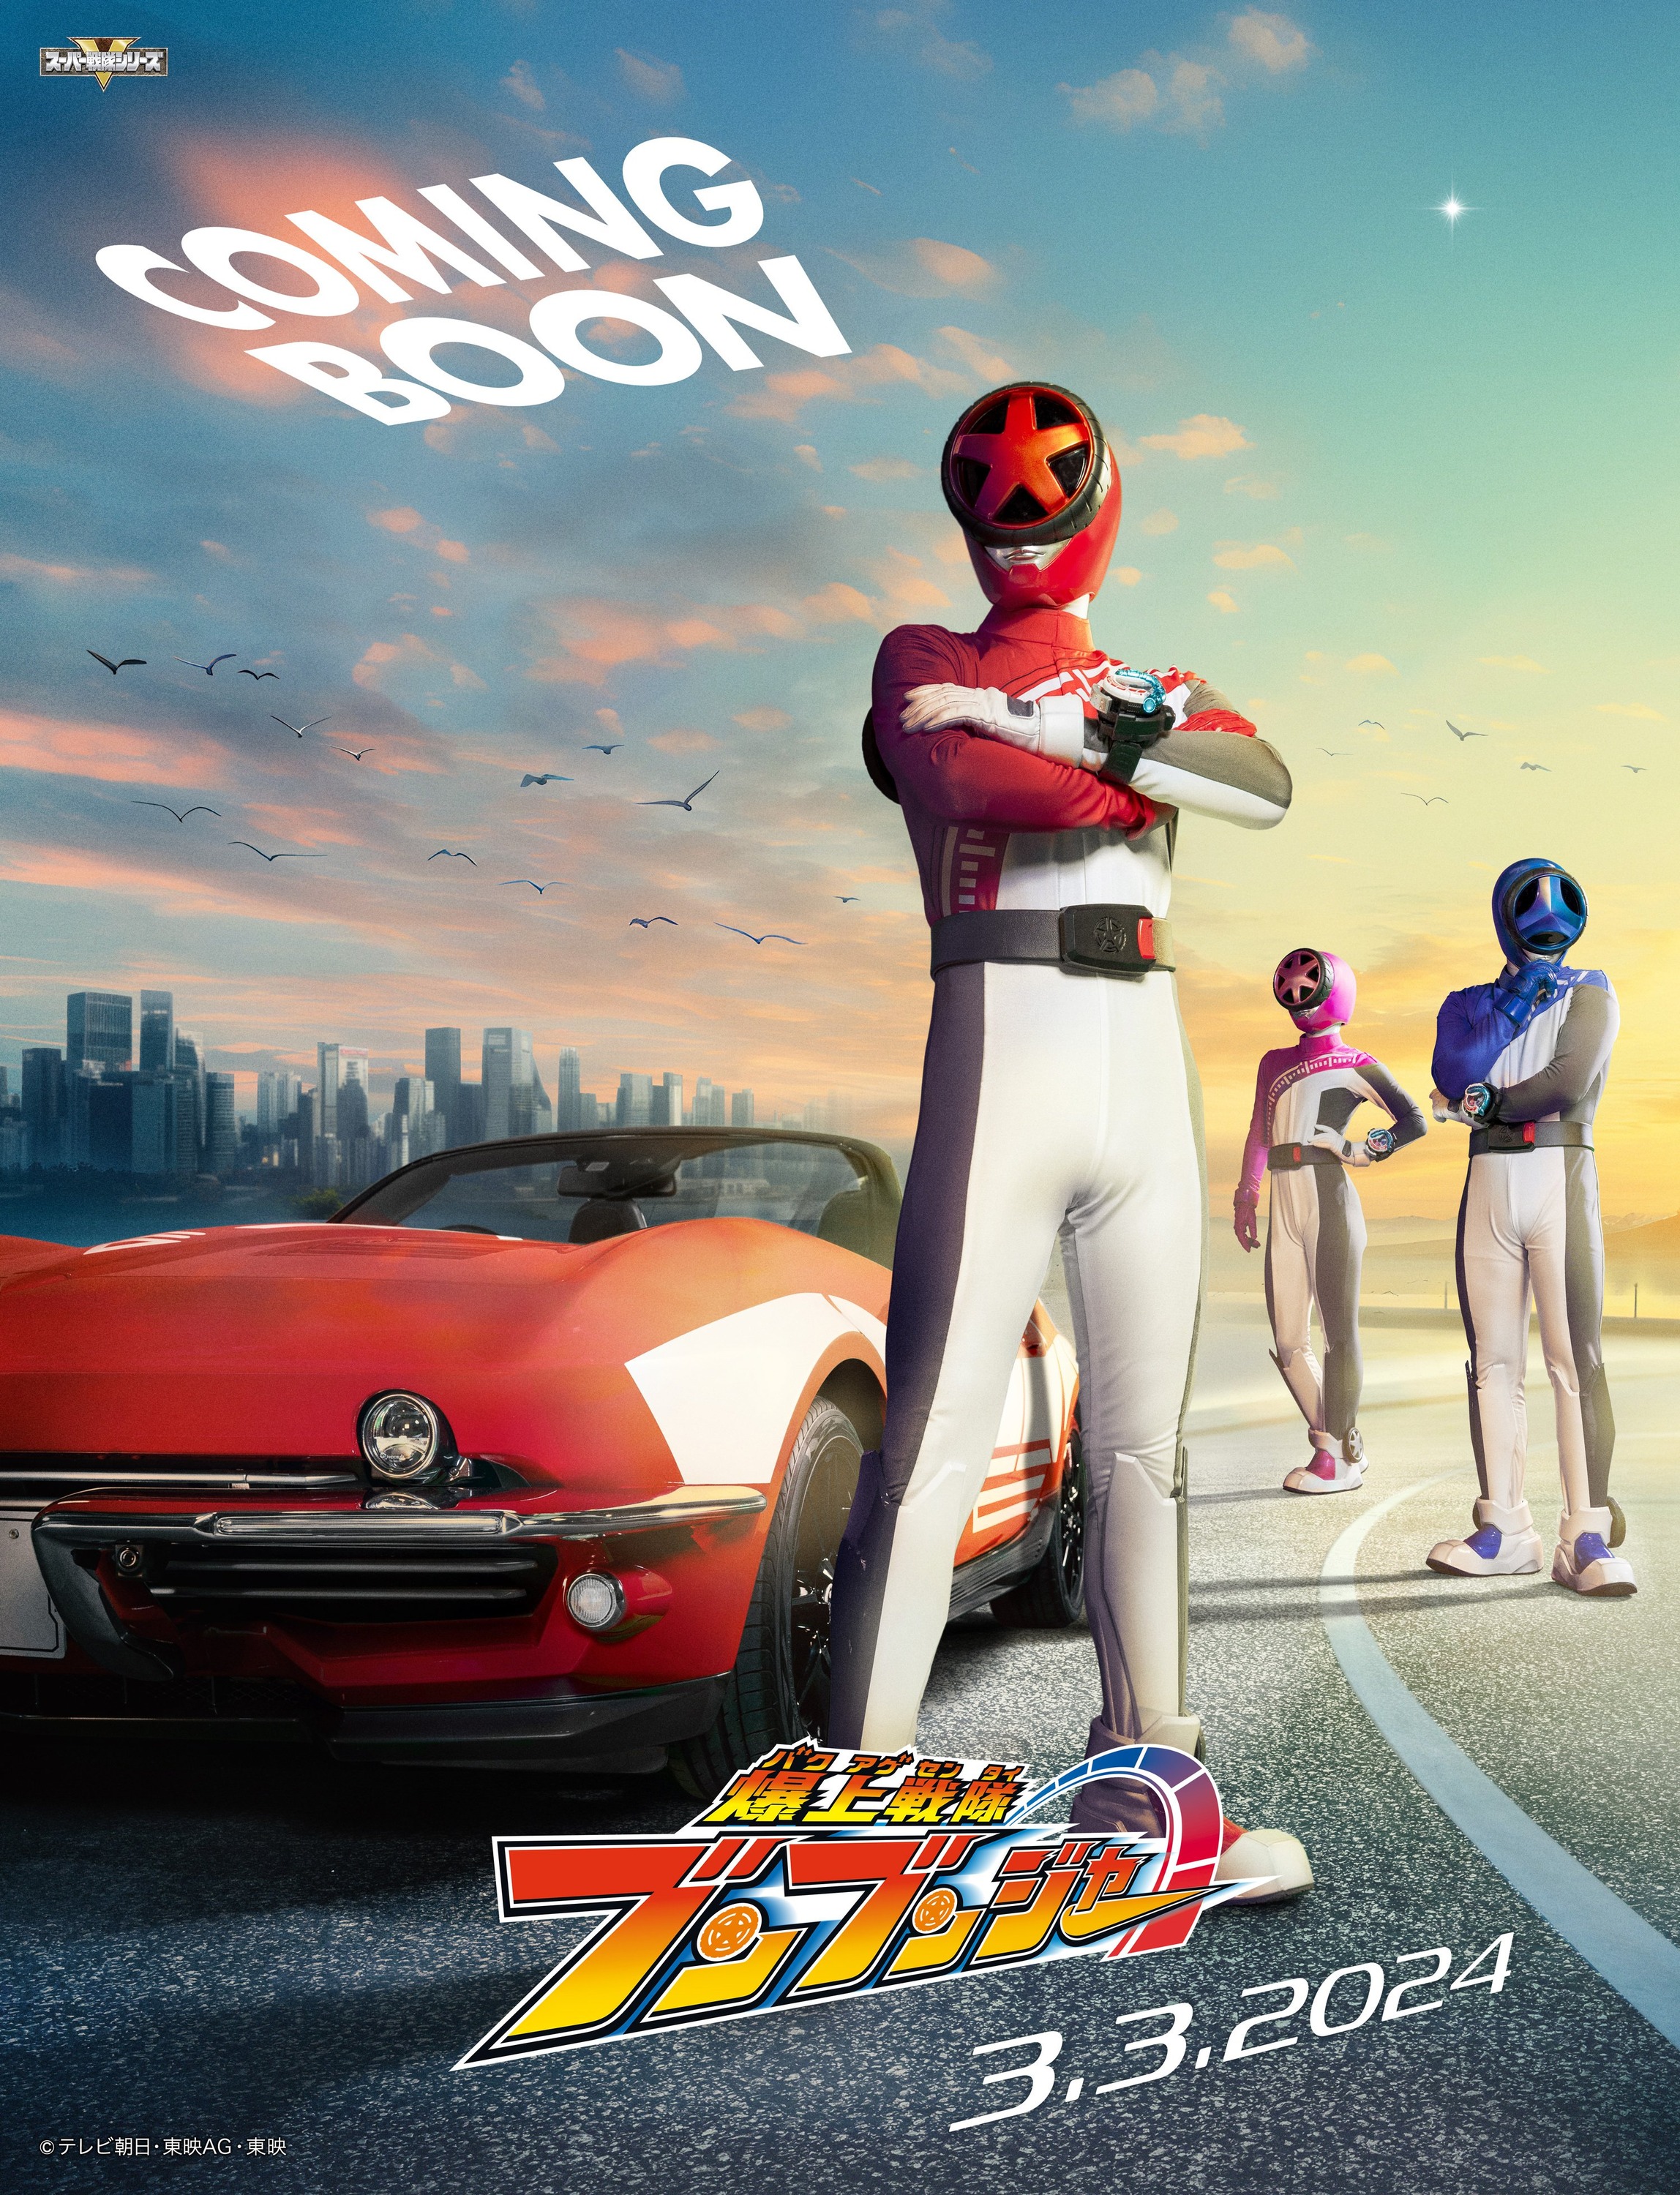 Mega Sized TV Poster Image for Bakuage Sentai Boonboomger (#1 of 3)